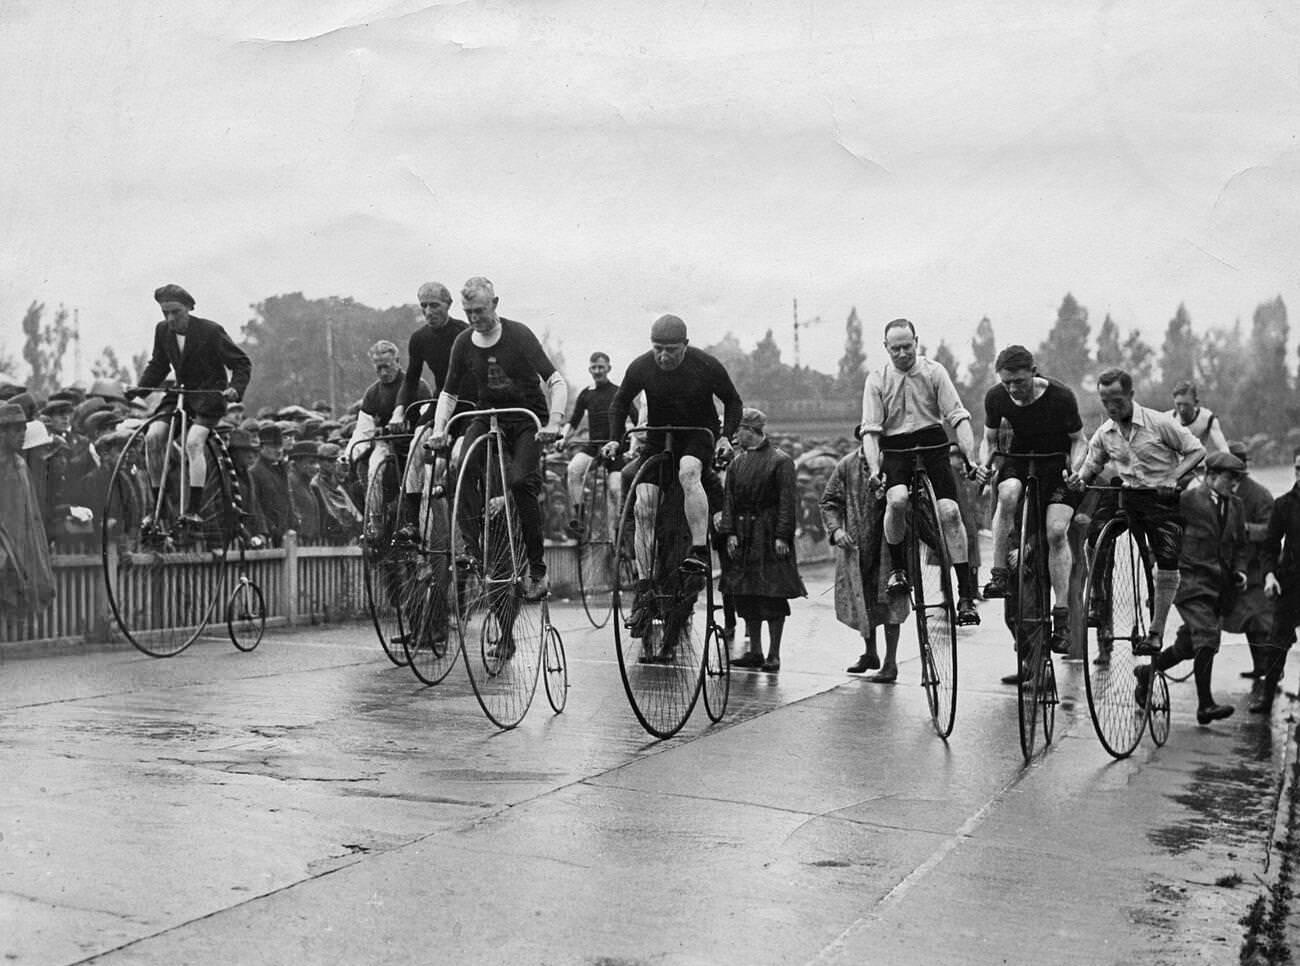 Penny Farthing Race at Herne Hill, London, 1932.